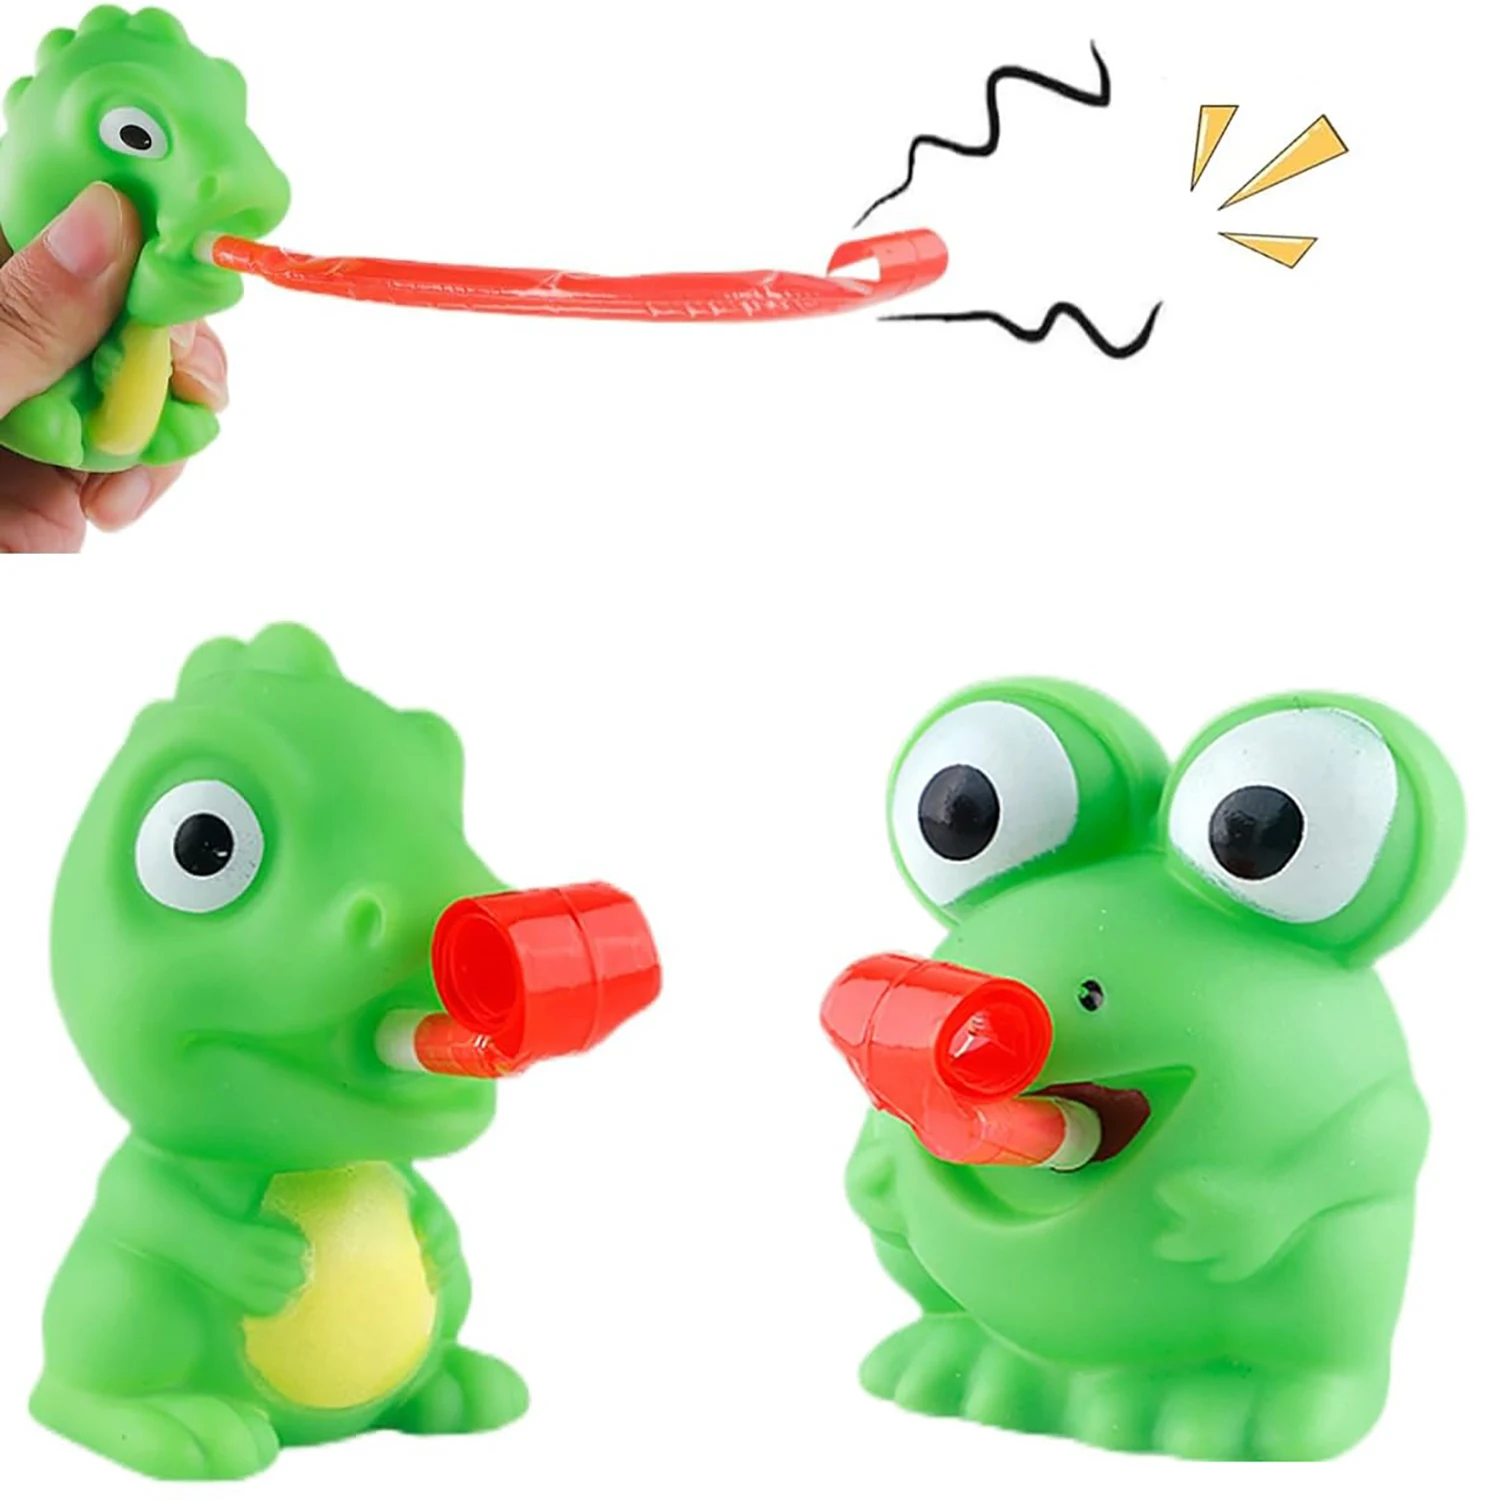 

Frog Dinosaur Squeeze Toys, Tongue Sticking Out Pinch Squeak Sensory Toy for Party Favor, Novelty Relief Stress Fidget Toys